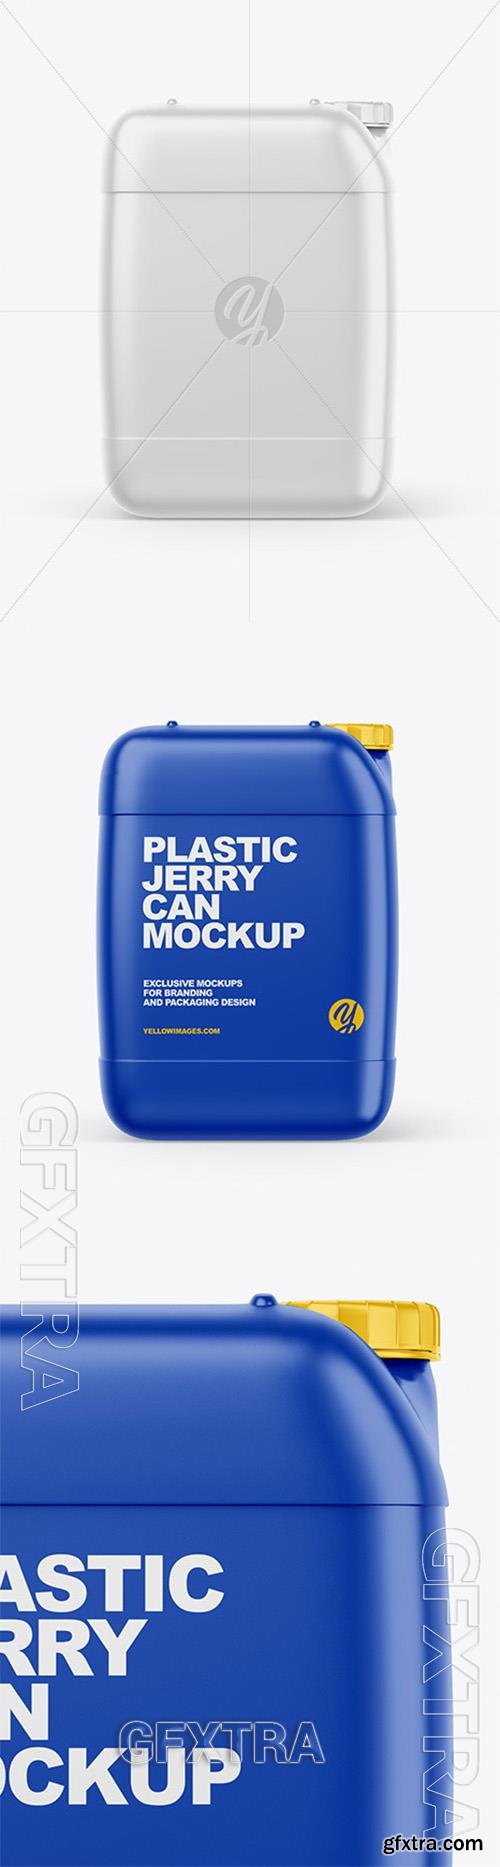 Plastic Jerry Can Mockup 61042